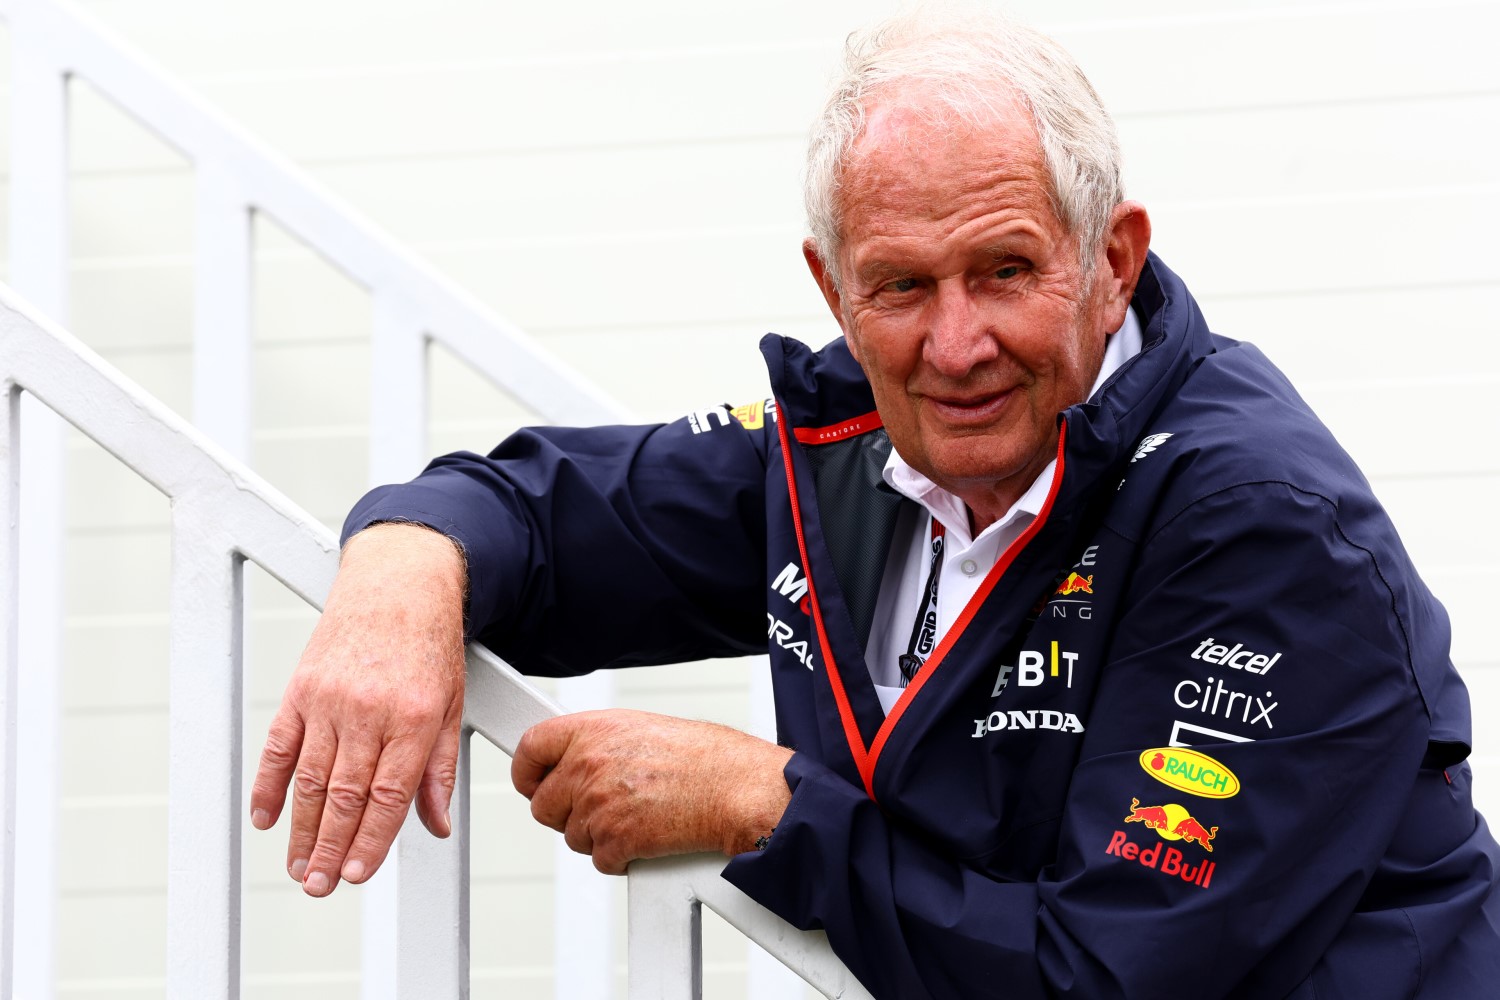 Red Bull Racing Team Consultant Dr Helmut Marko looks on during practice ahead of the F1 Grand Prix of Azerbaijan at Baku City Circuit on April 28, 2023 in Baku, Azerbaijan. (Photo by Mark Thompson/Getty Images) // Getty Images / Red Bull Content Pool